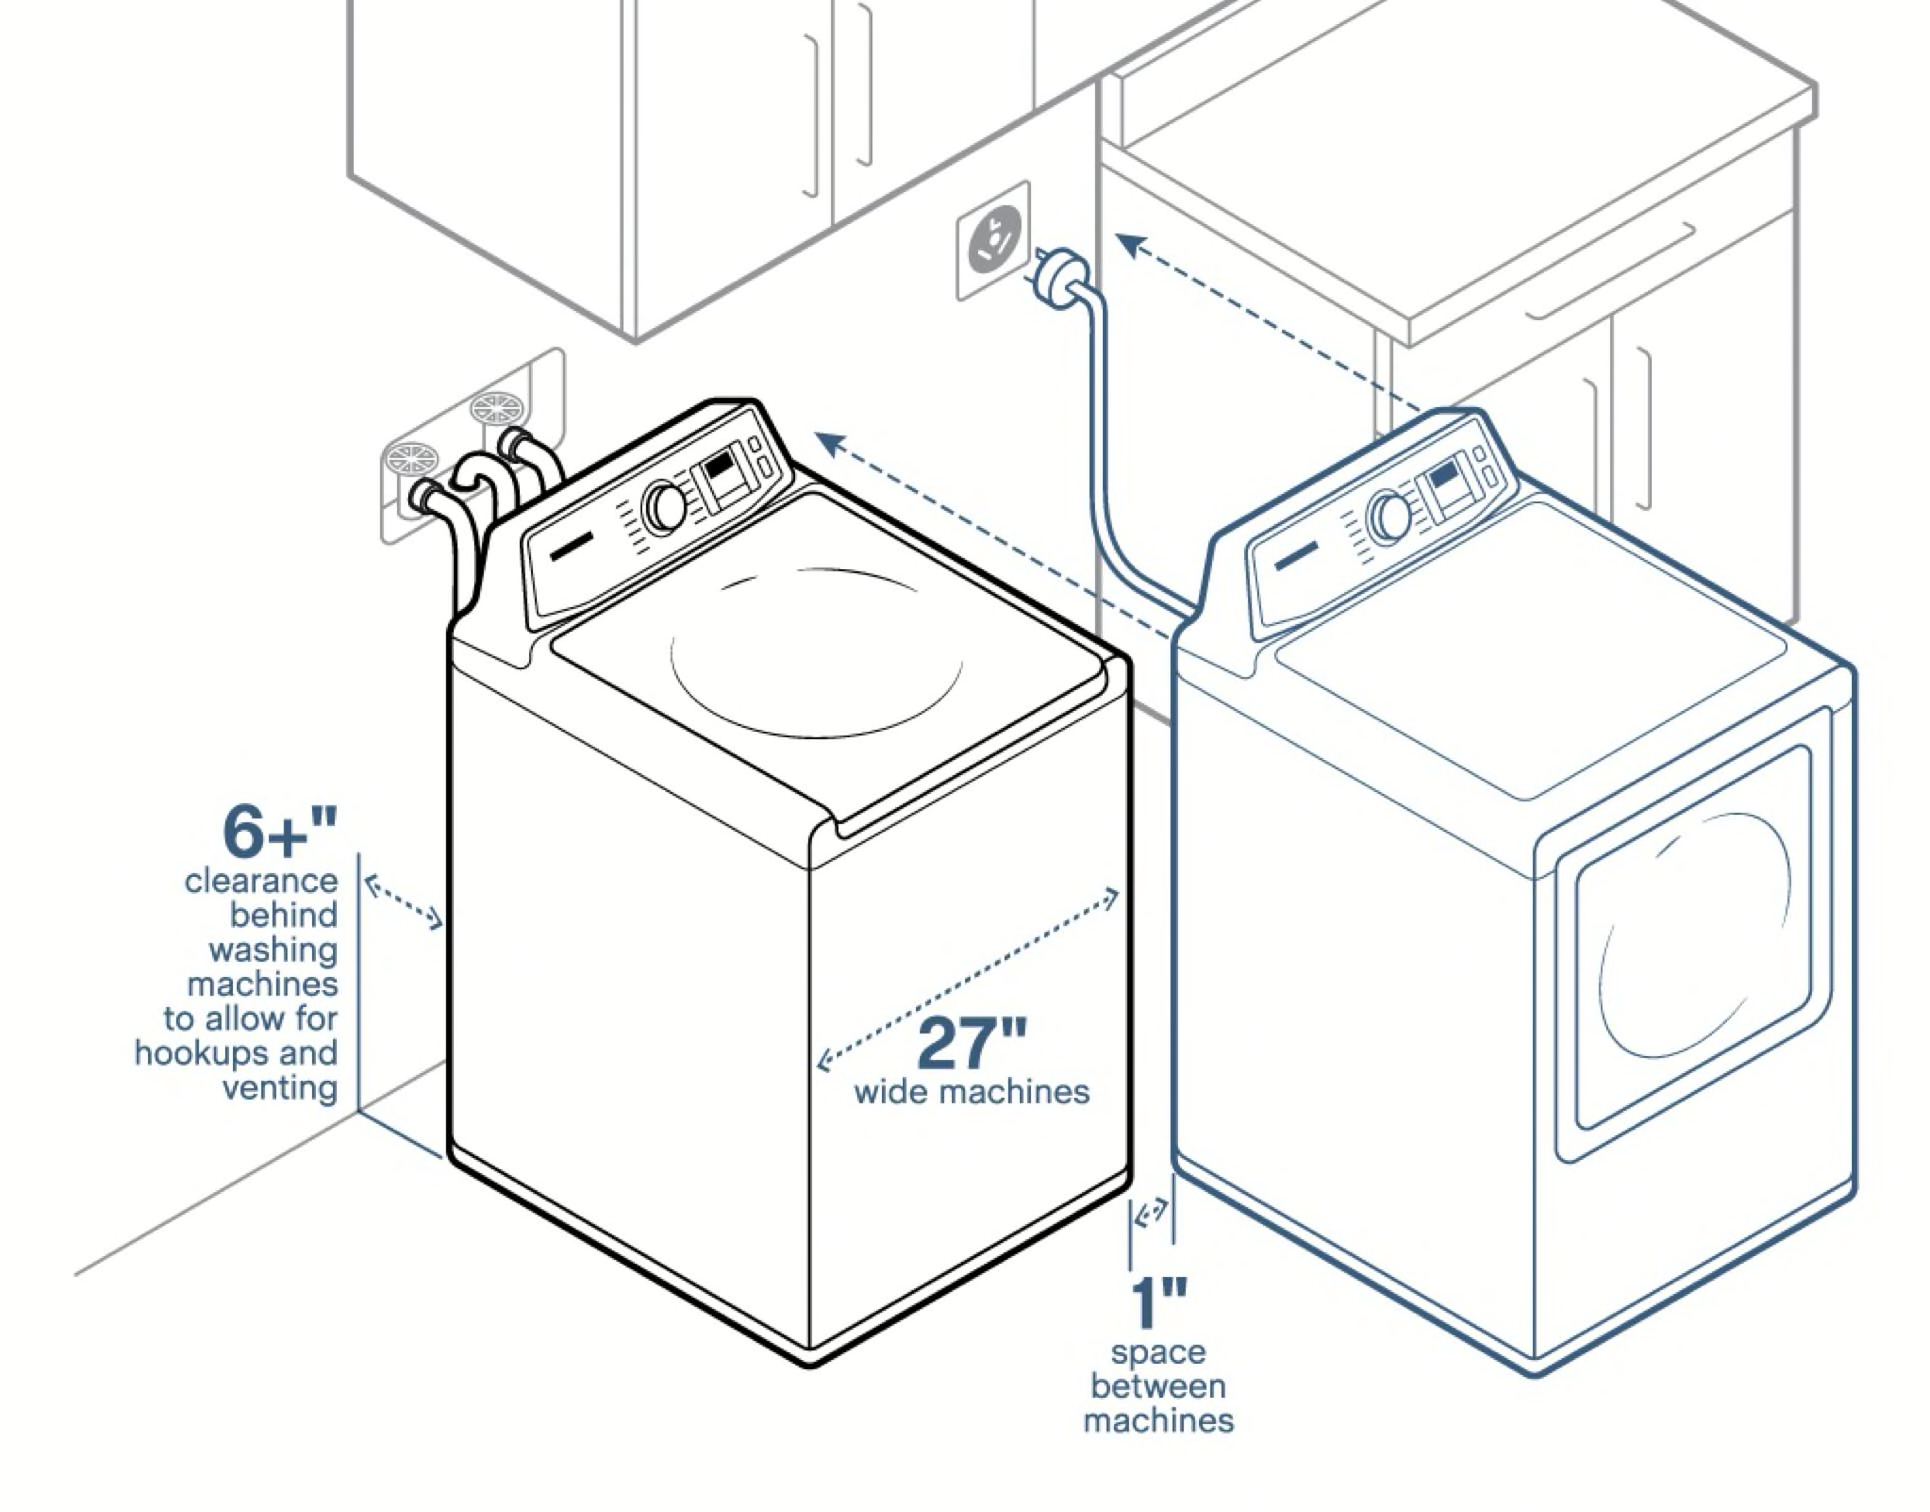 Leave 6 inches between the wall and your washer and dryer, and one inch between the two.